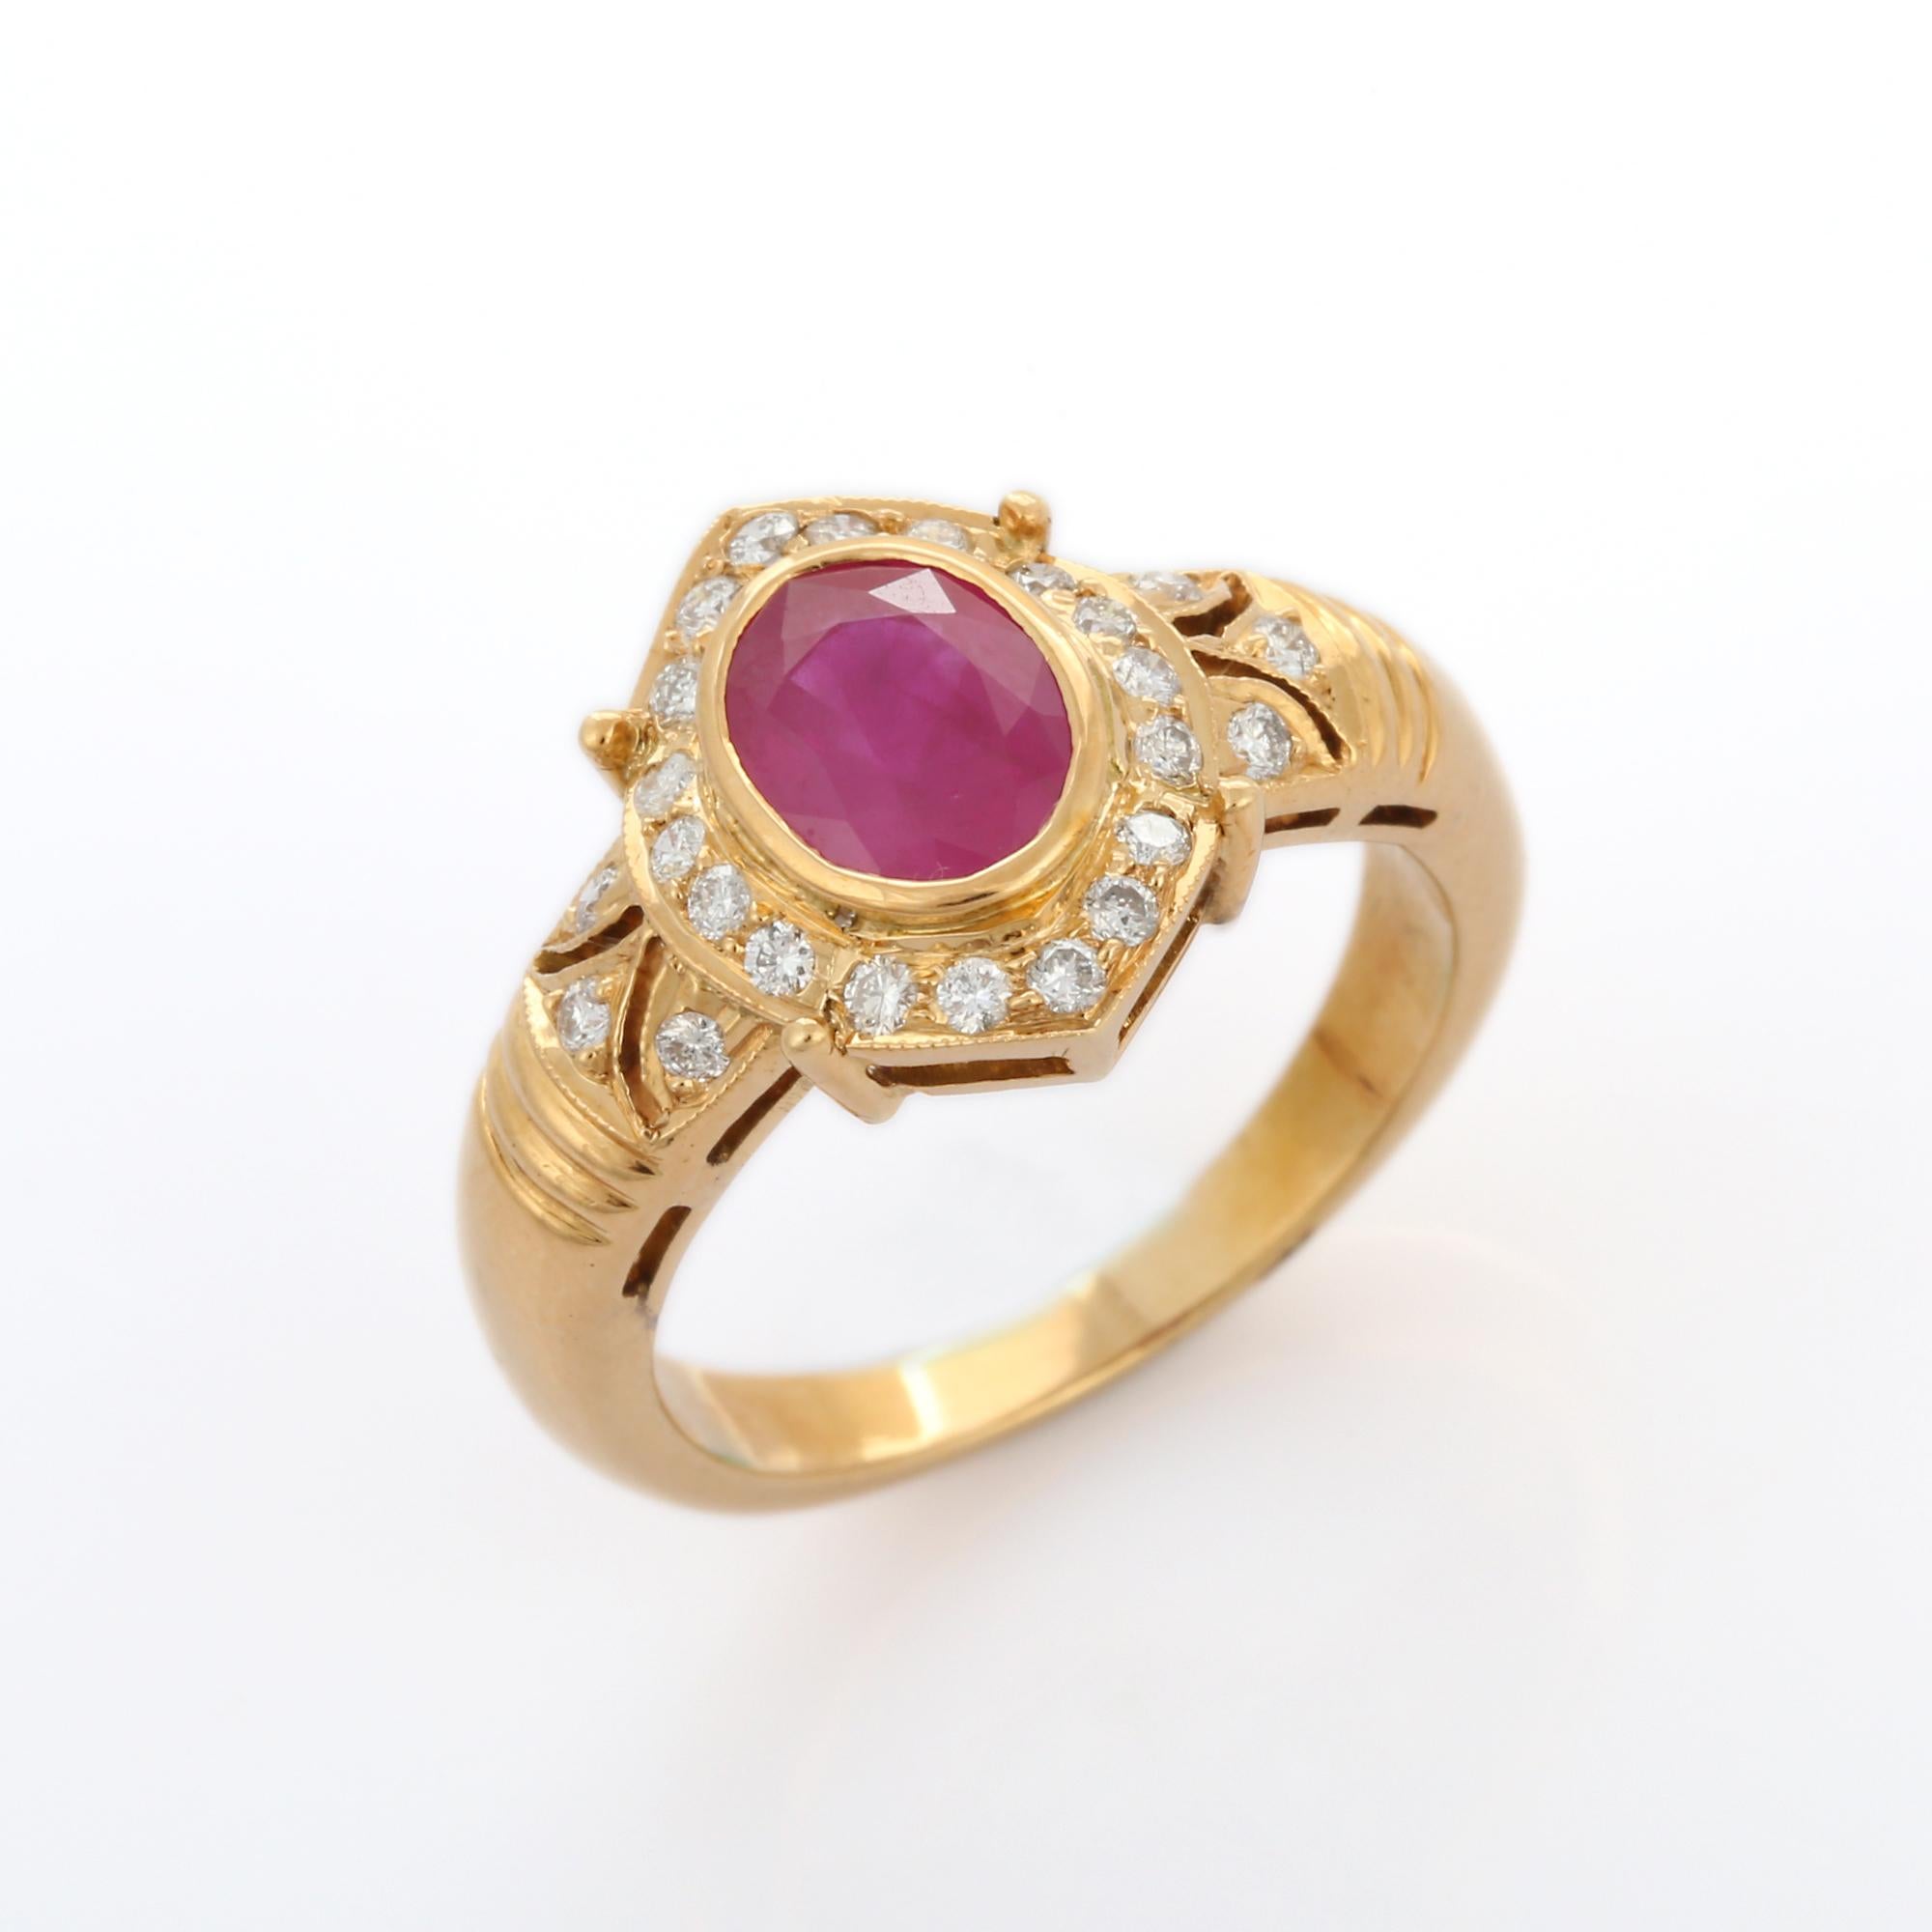 For Sale:  Contemporary Style Diamond Ruby Ring in 18K Yellow Gold 5